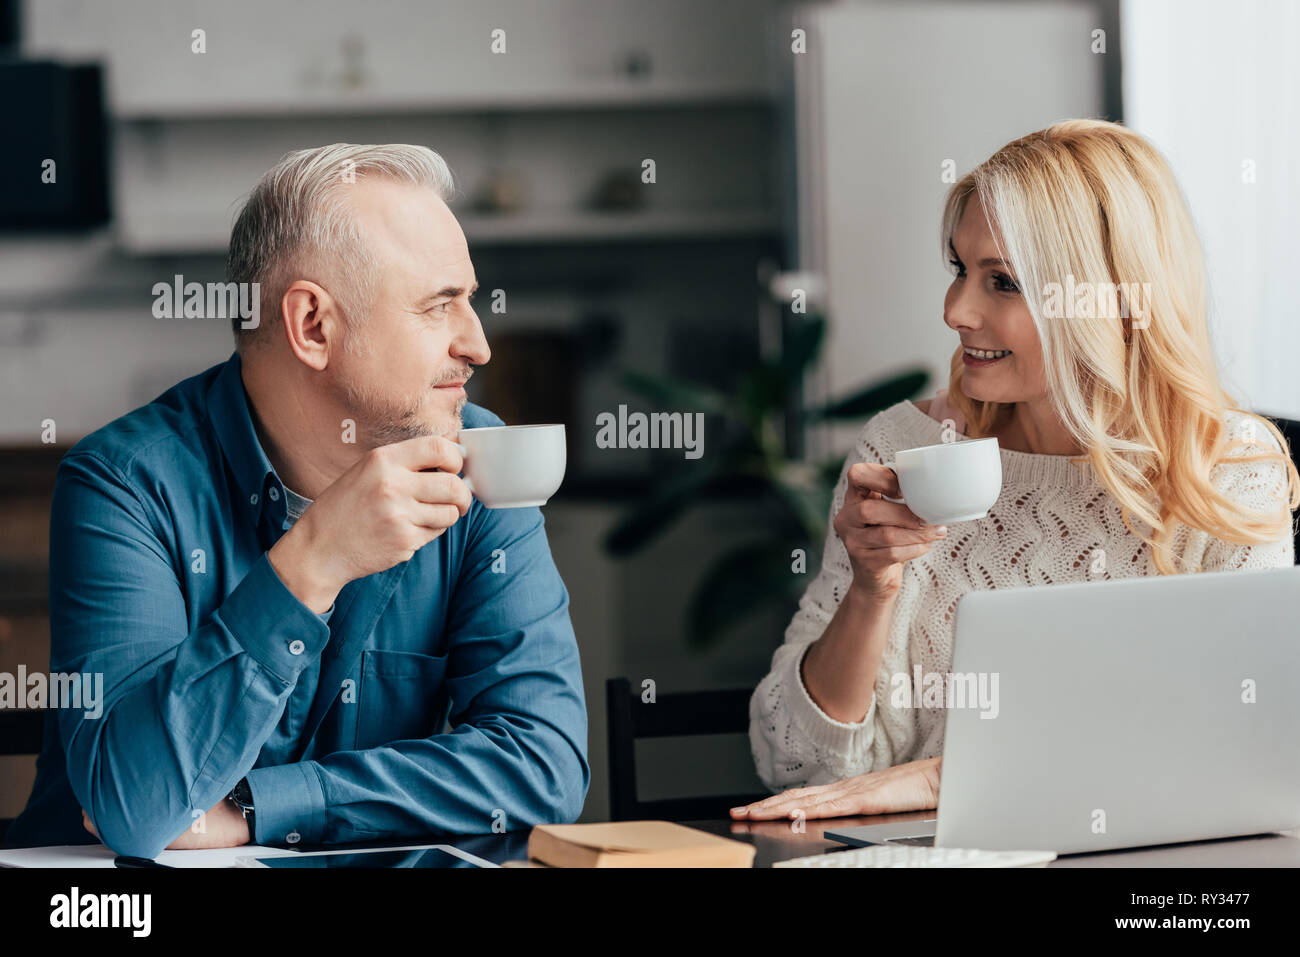 cheerful couple holding cups with drinks and looking at each other at home Stock Photo